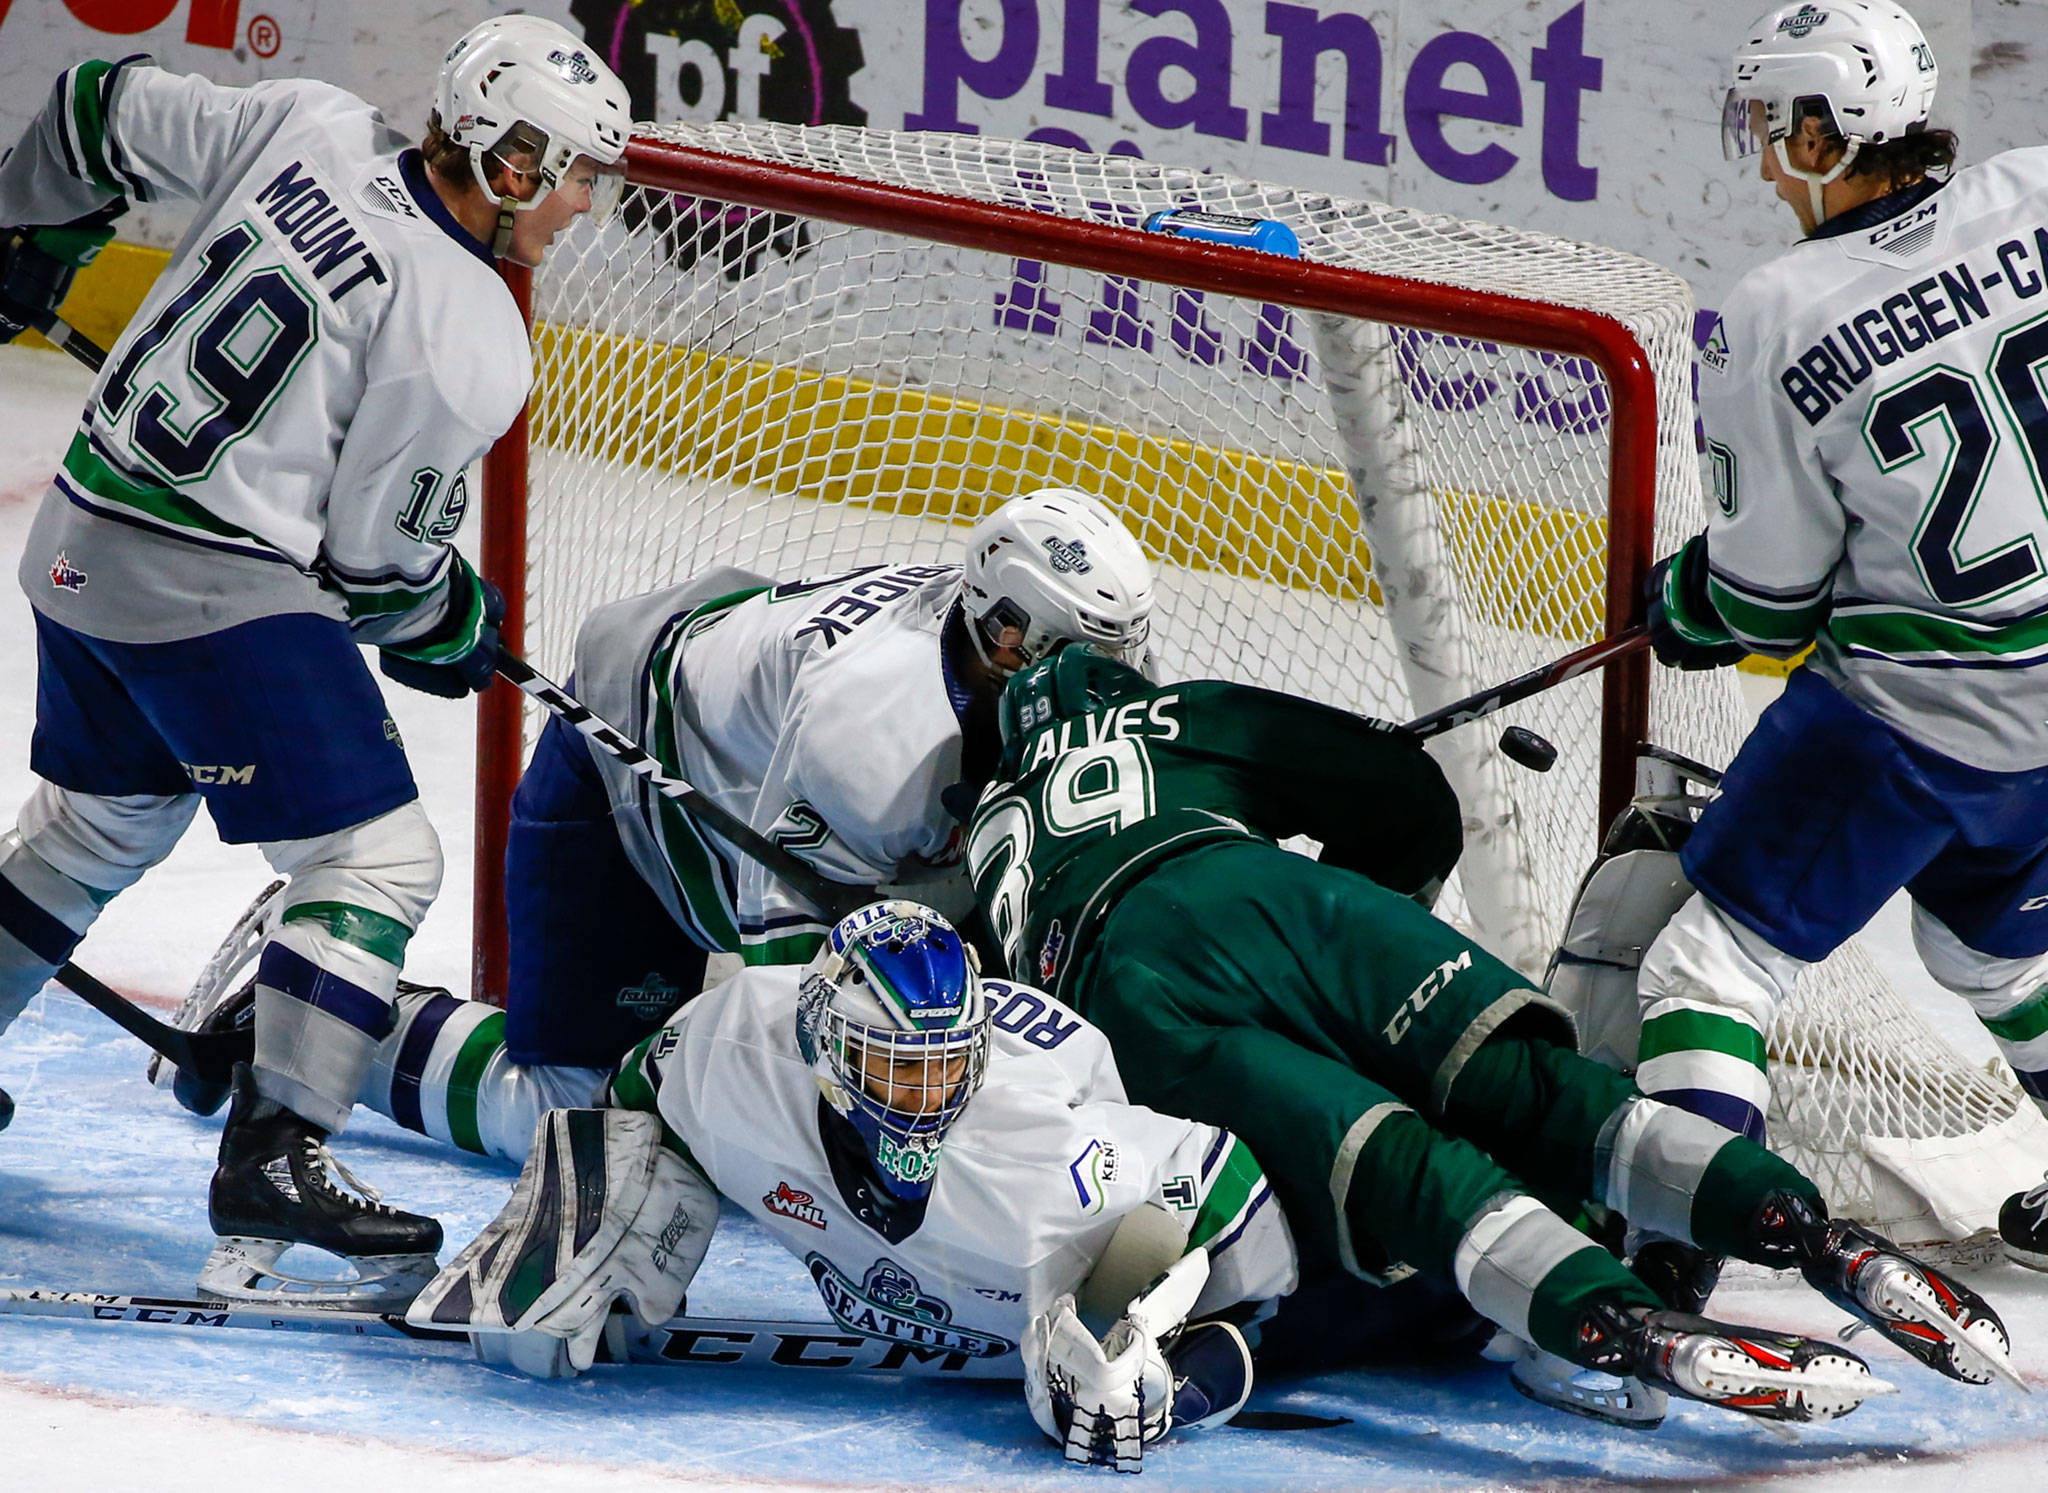 Everett’s Gage Goncalves scores a goal over Seattle’s Roddy Ross in the second period Sunday evening at ShoWare Center in Kent on March 8, 2020. The Silvertips won 3-2. (Kevin Clark / The Herald)